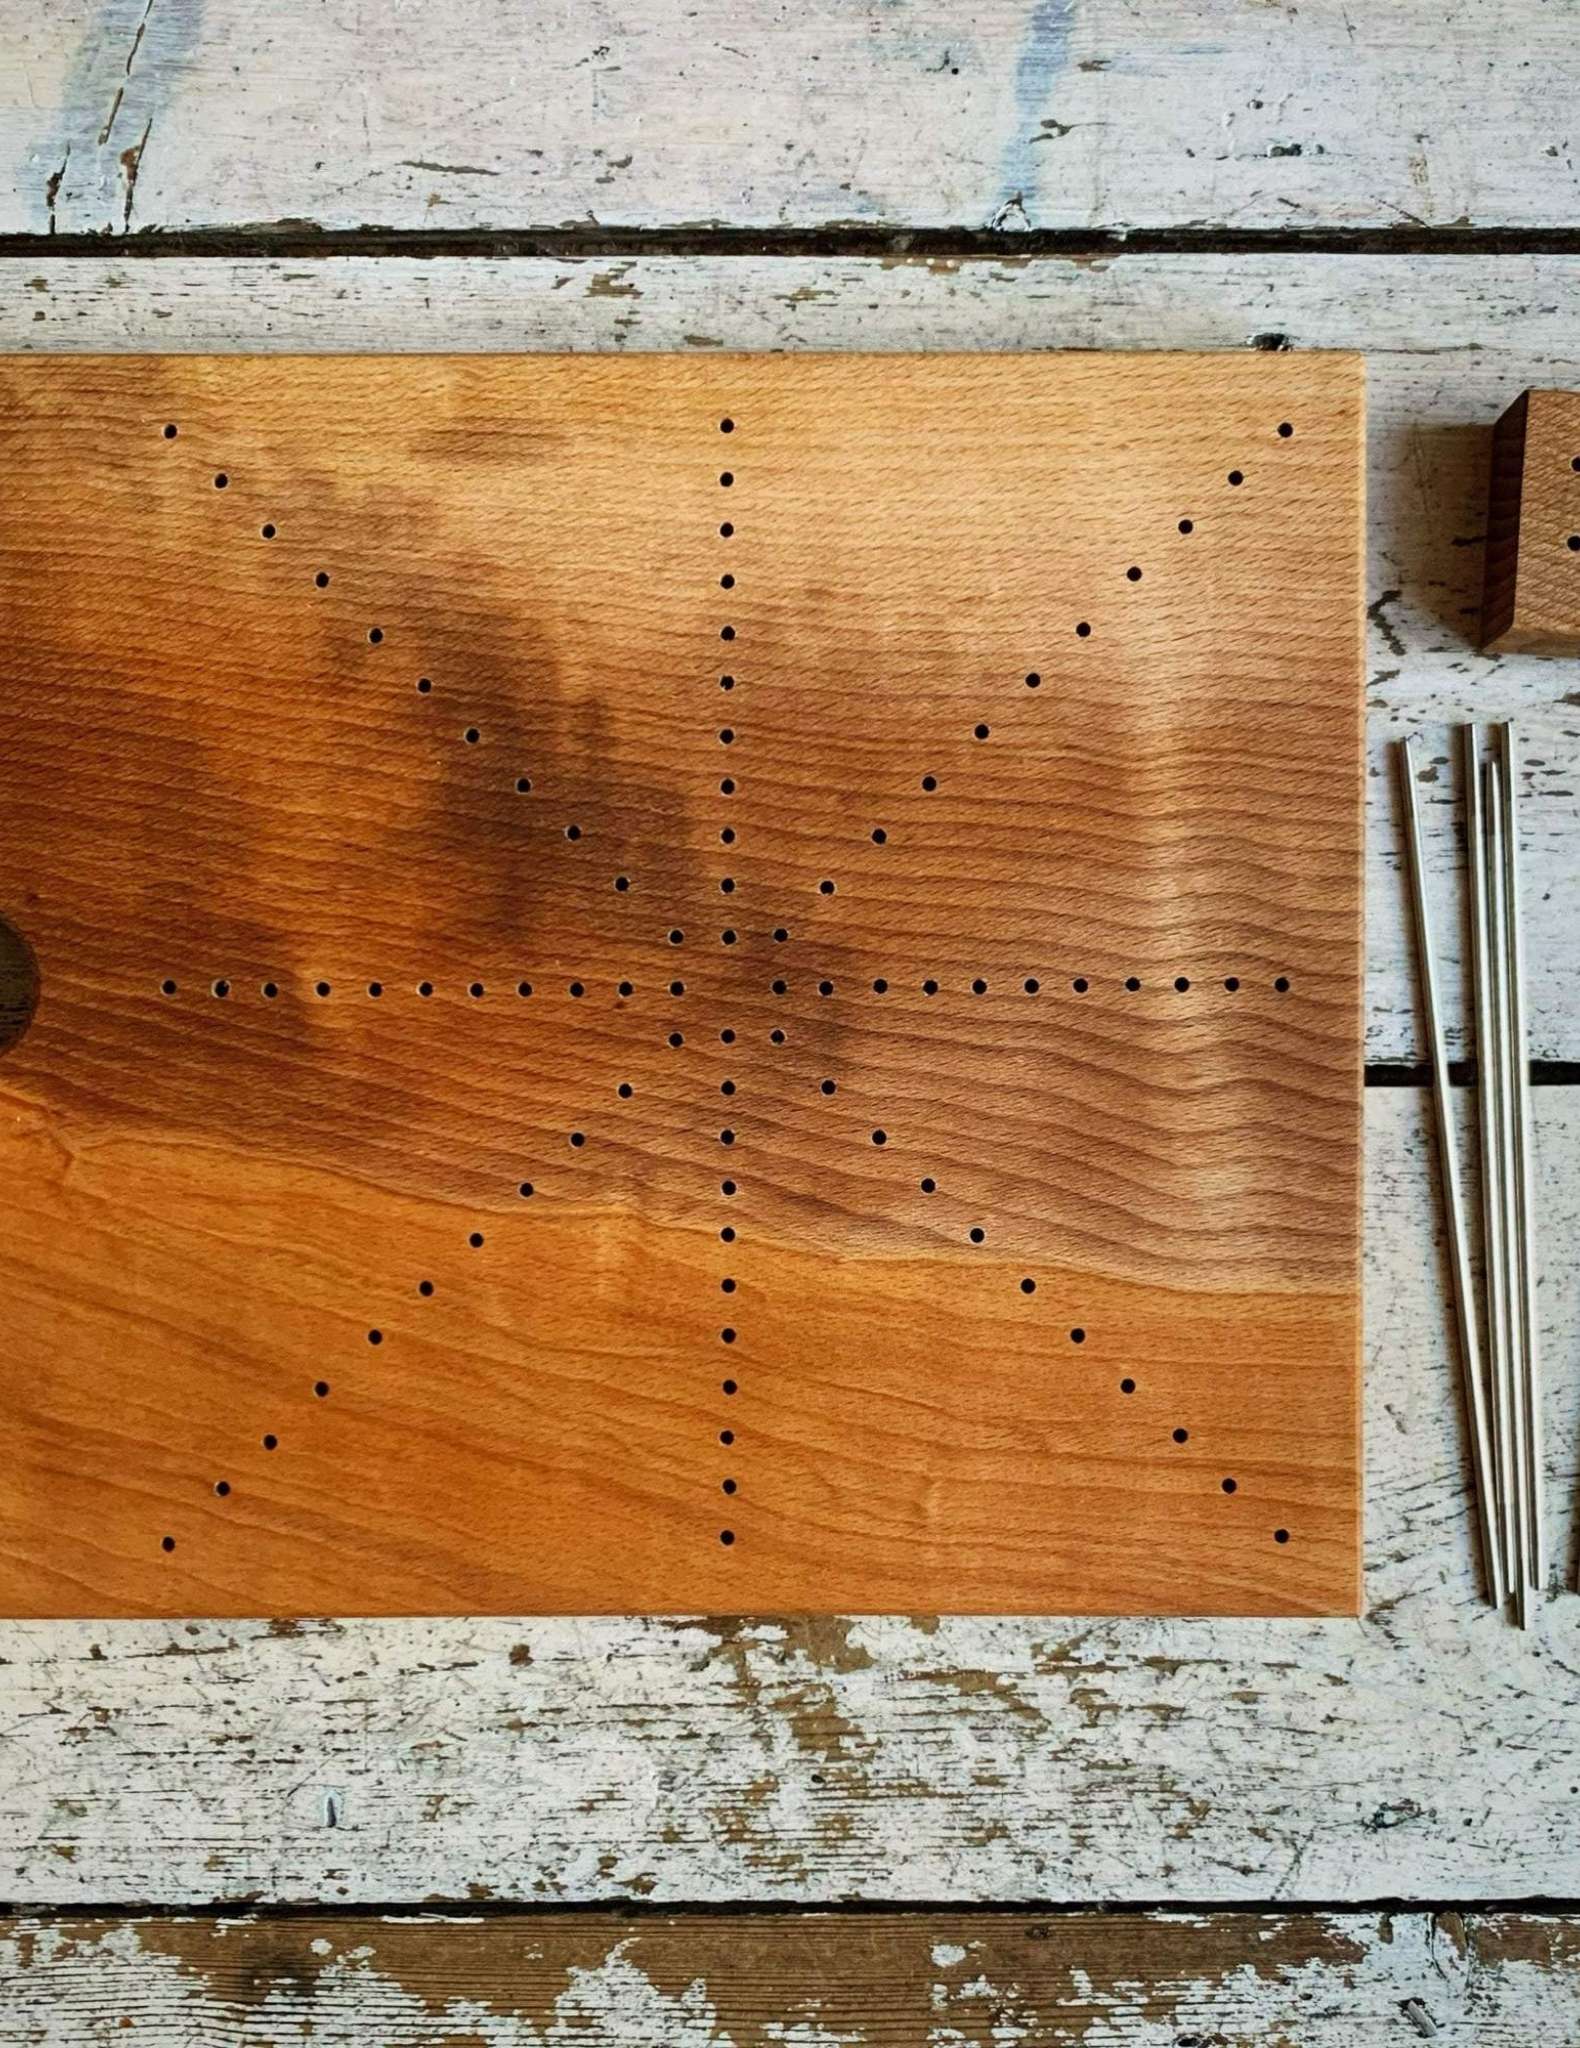 A wooden board marked with holes in diagonal lines over the surface, with blocking pins laying at the right side.